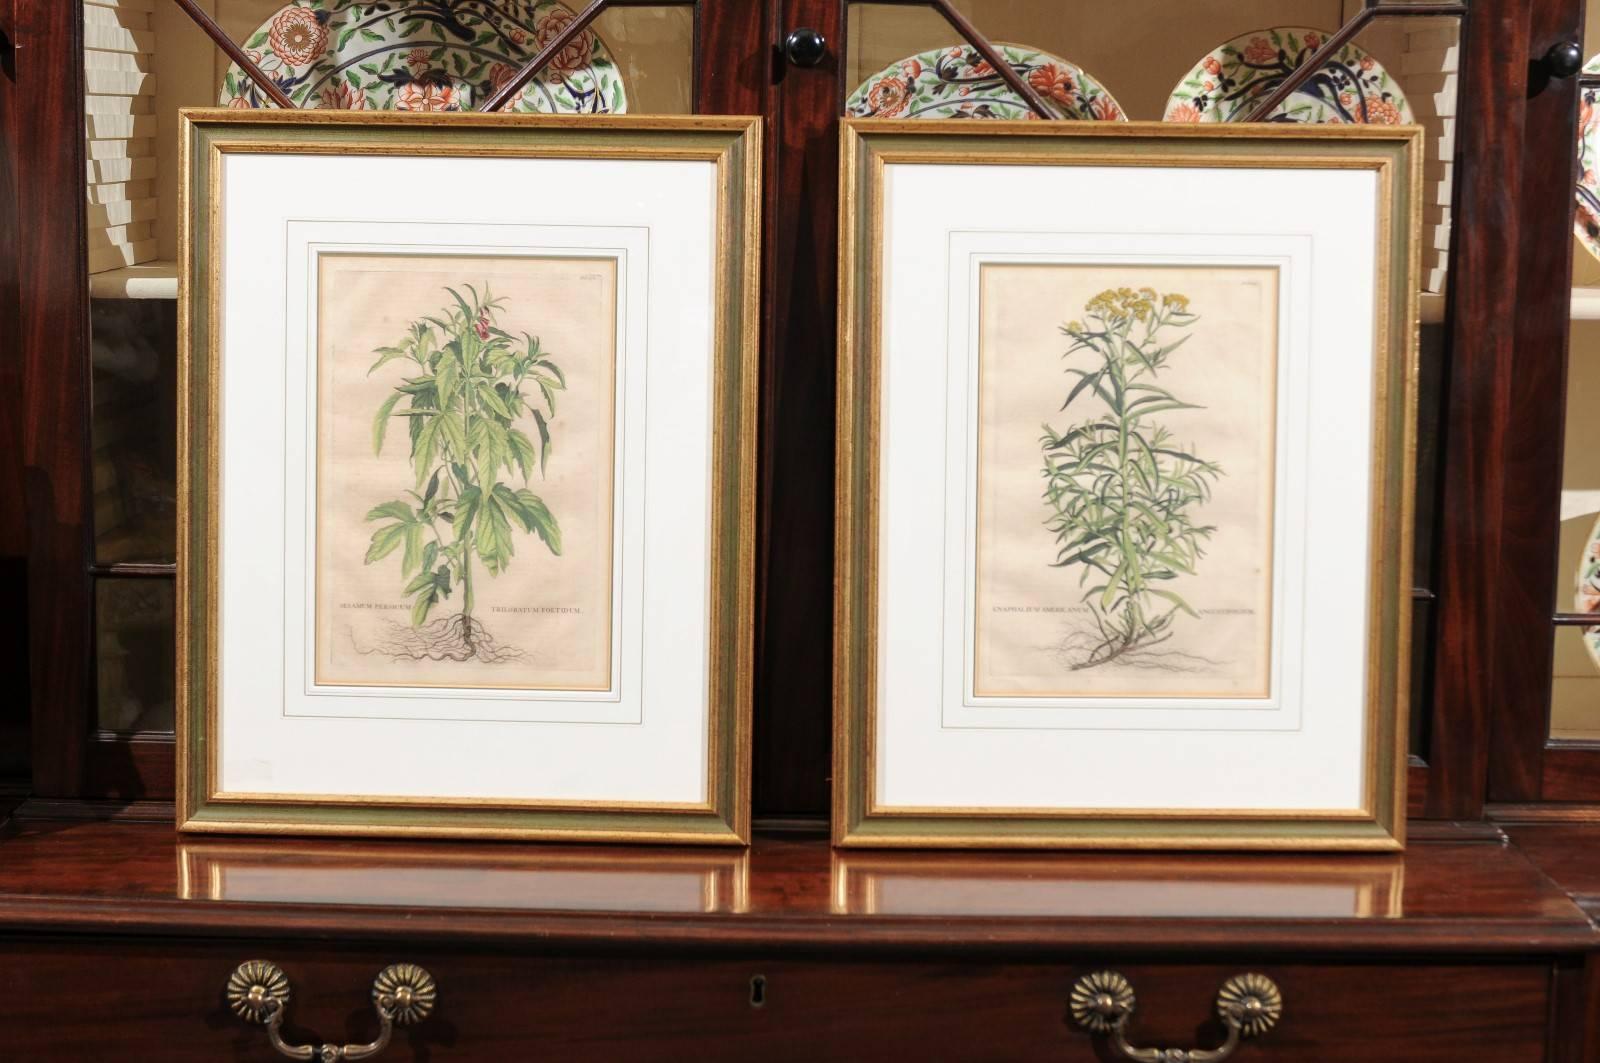 Pair of Dutch Botanical Prints from 